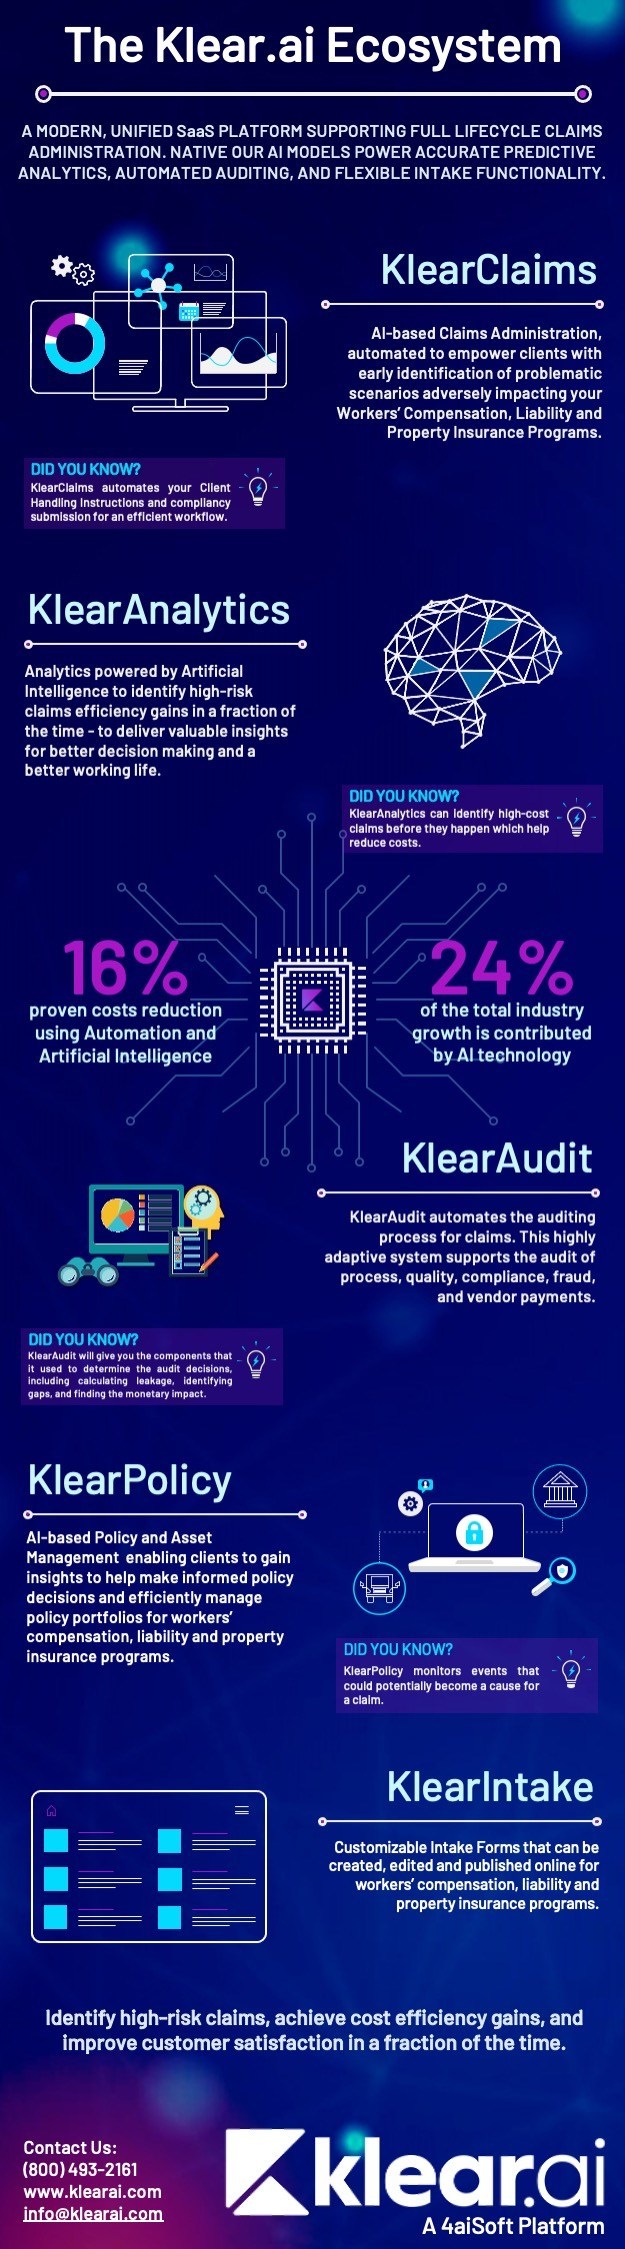 KlearClaims - Klear.ai's 'end to end' Claims Management System, FIRST of its kind designed with native AI capabilities and focused automation to improve supervisor-to-adjustor ratios and virtually eliminate the need for Claims Assistants. The system provides insights into adjuster assignment, provider recommendations, regulatory compliance, reserve, litigation, fraud, subrogation, and settlement forecasting.